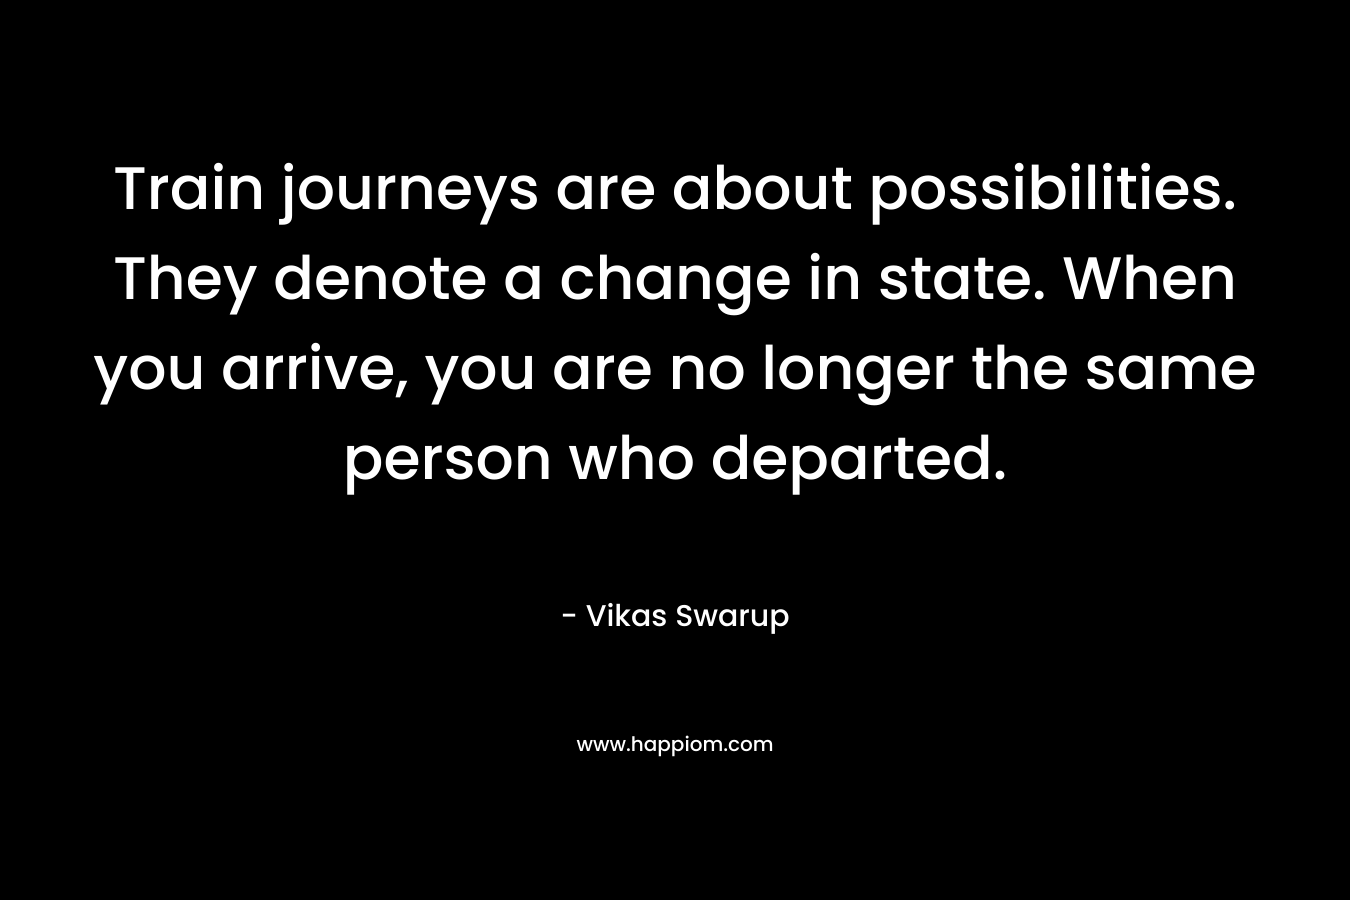 Train journeys are about possibilities. They denote a change in state. When you arrive, you are no longer the same person who departed. – Vikas Swarup